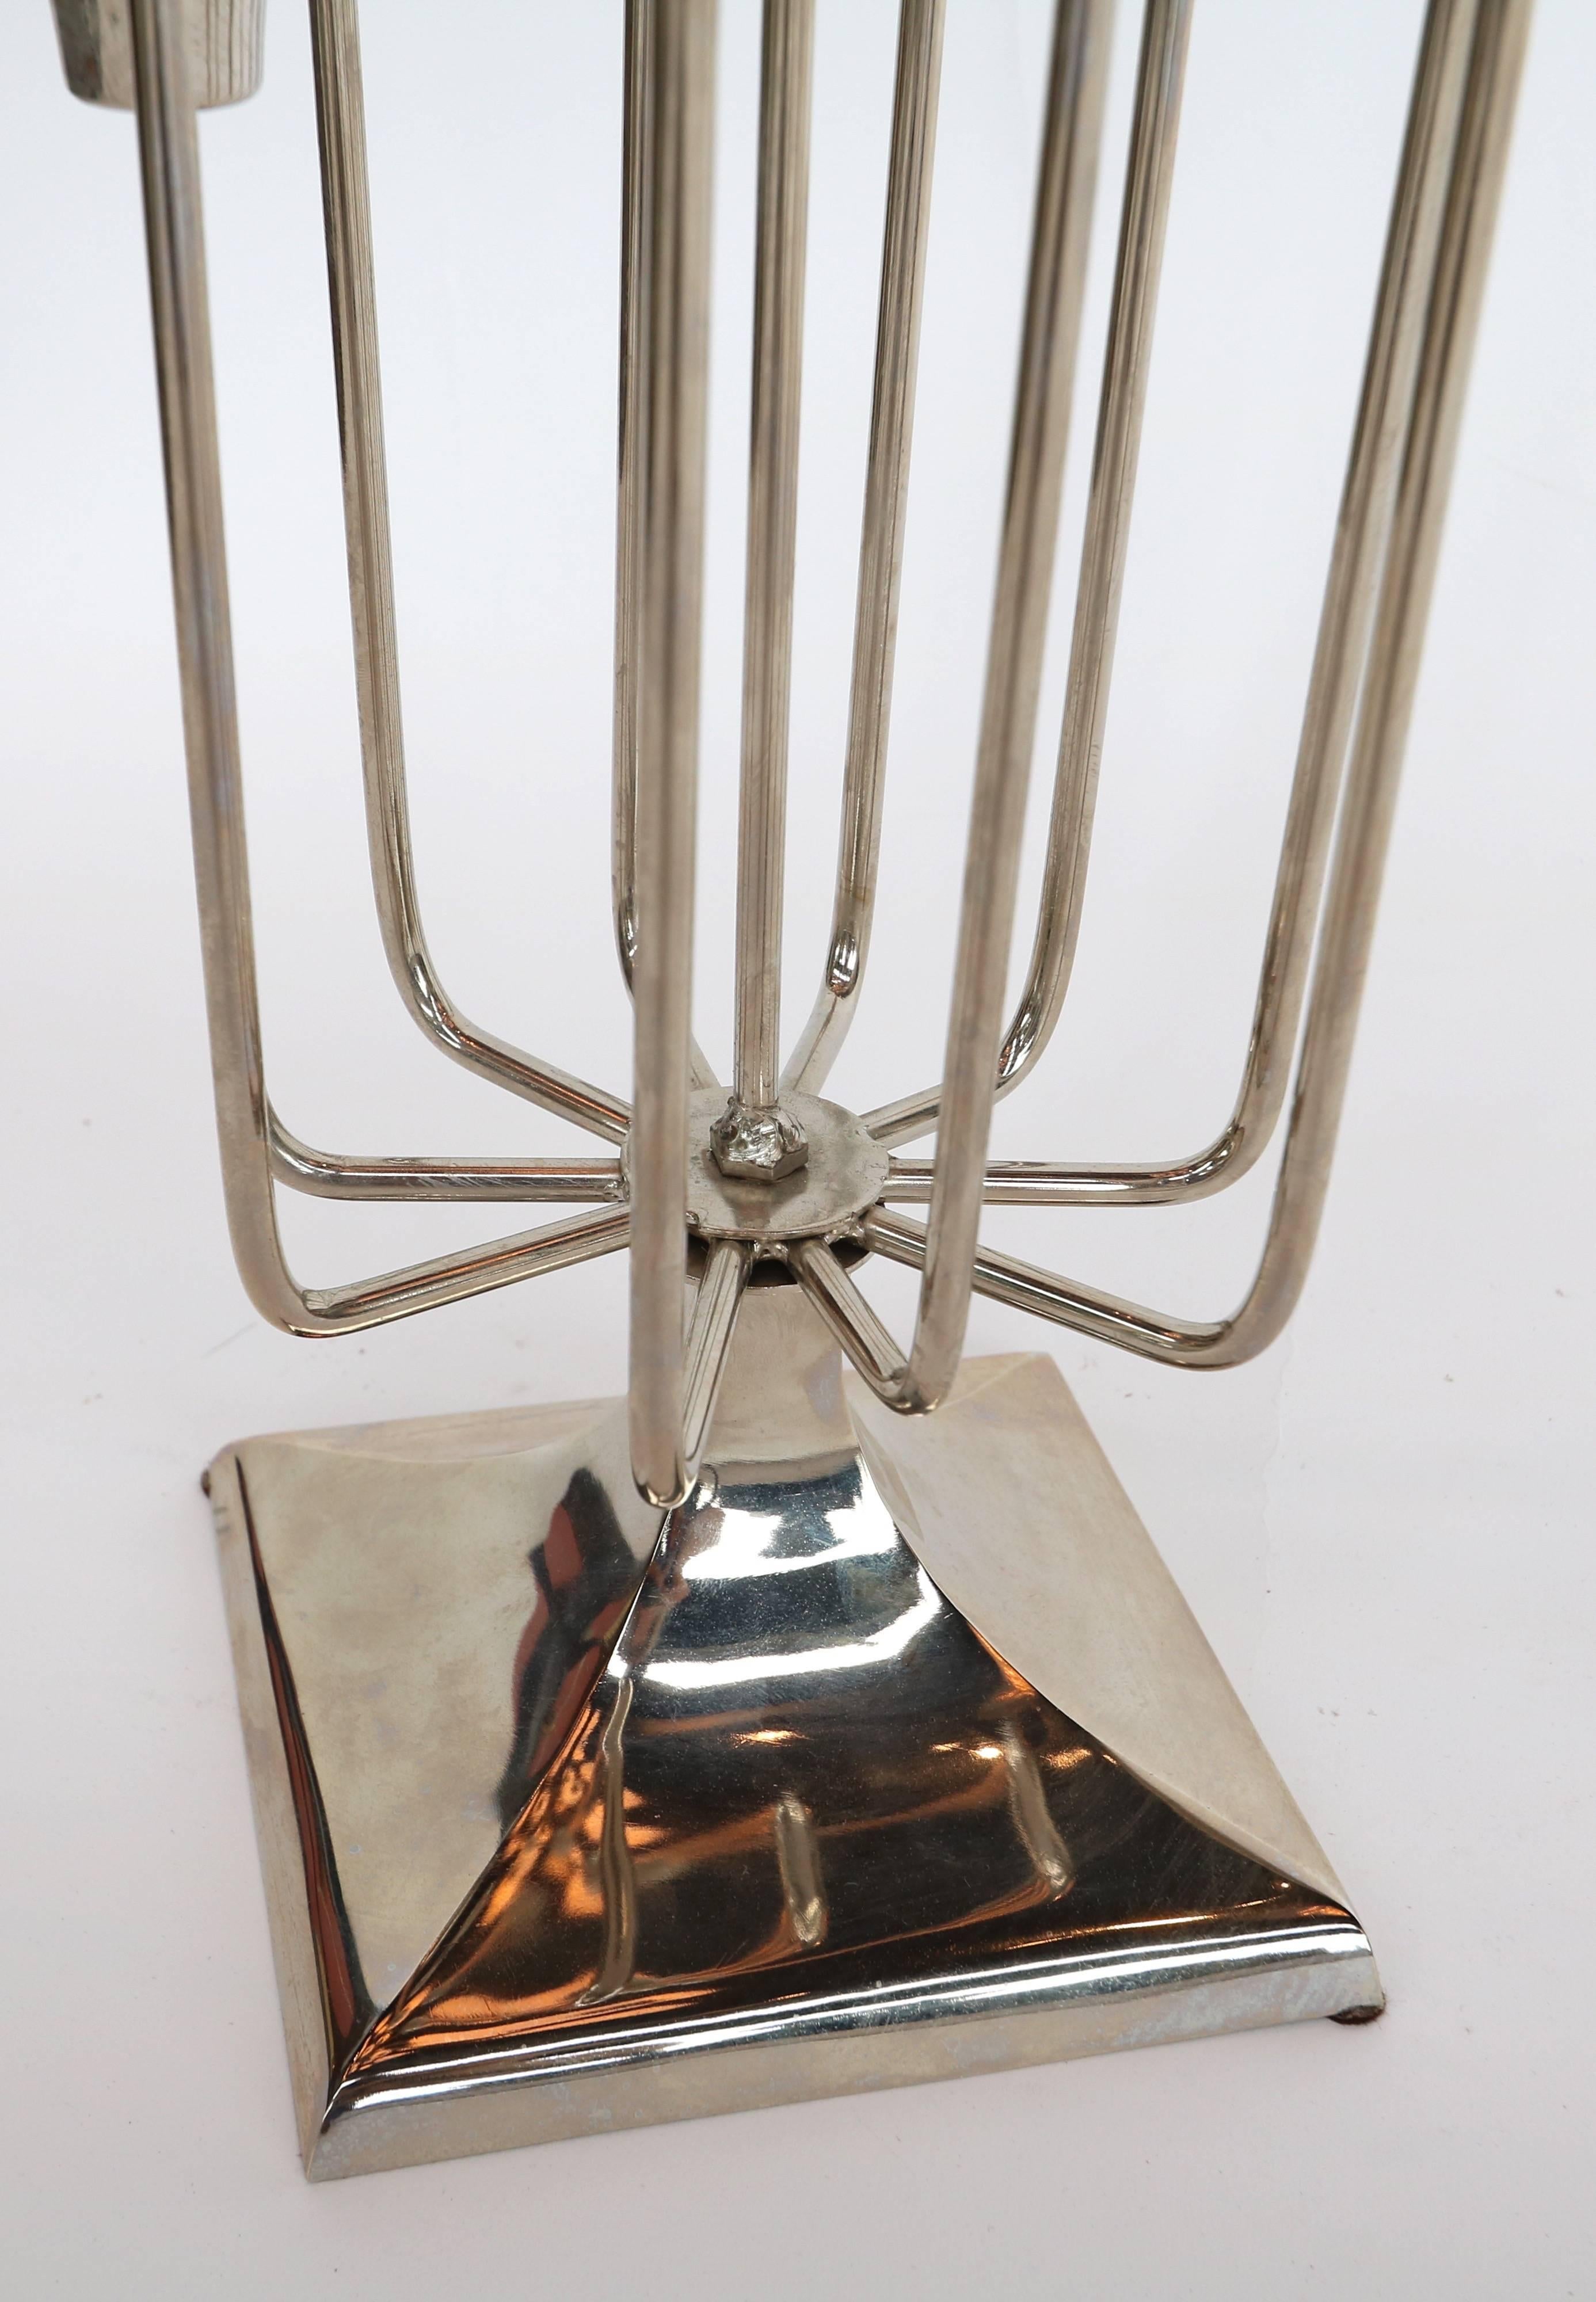 Late 20th Century Pair of Tall 1970s Nickel-Plated Candleholders with Eleven Cups